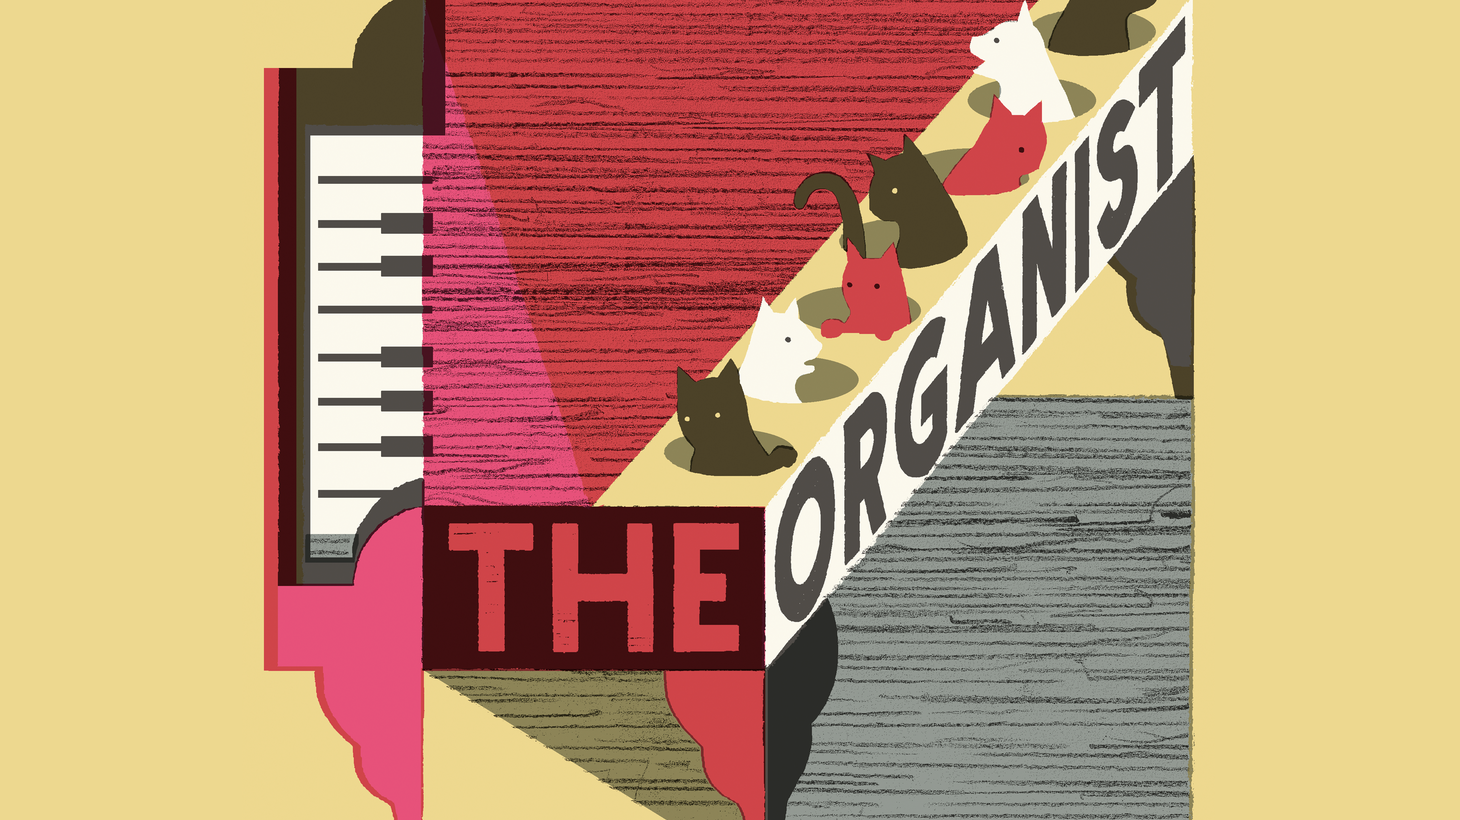 This week the Organist explores sound design in two new documentaries, Irene Lusztig's The Motherhood Archives and Matt Wolf's Teenage.